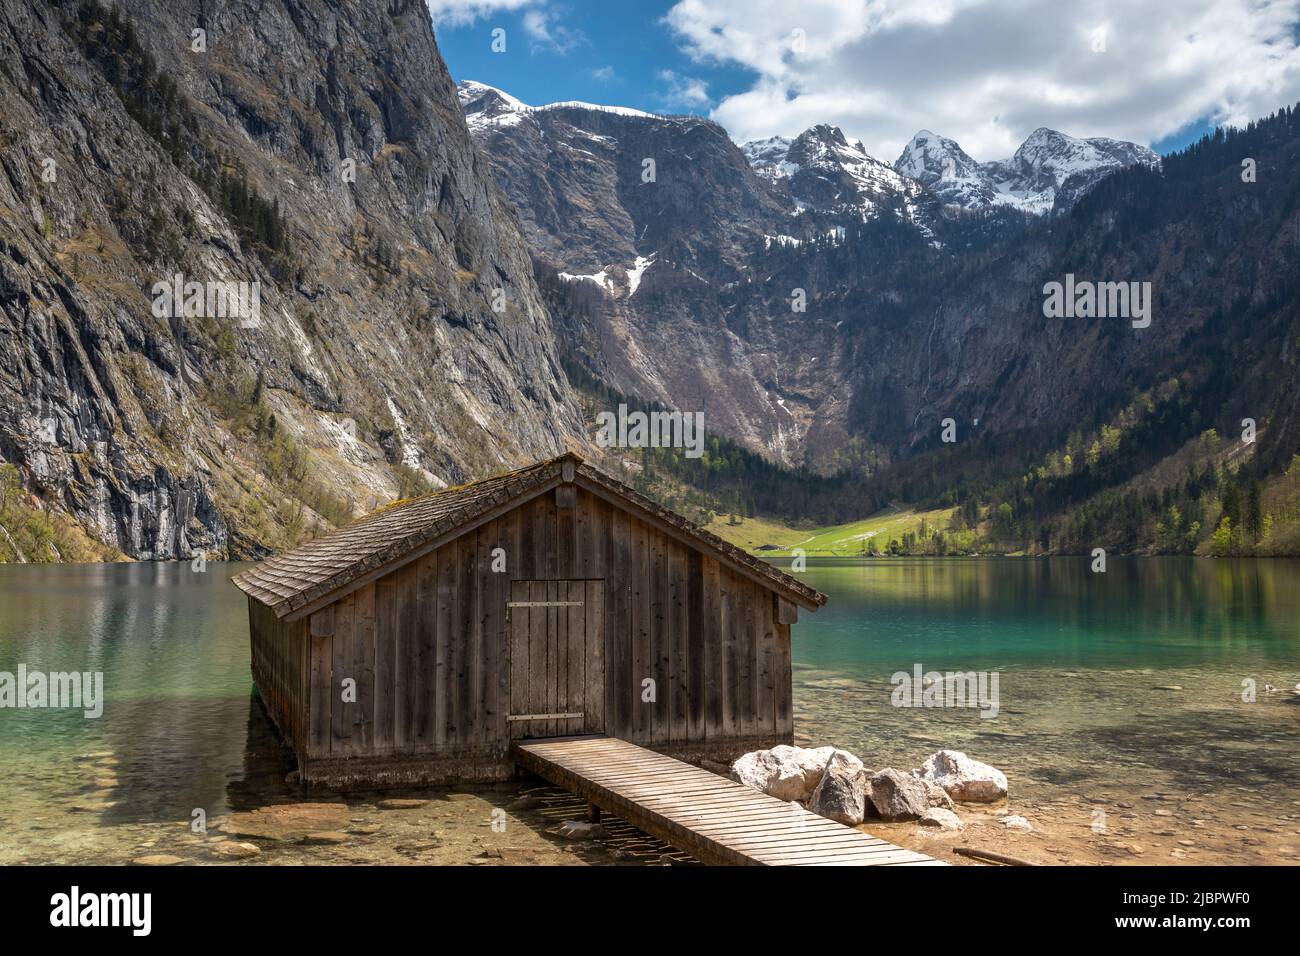 Boathouse at lake Obersee near lake Koenigssee in Berchtesgaden national park, Bavaria, Germany Stock Photo